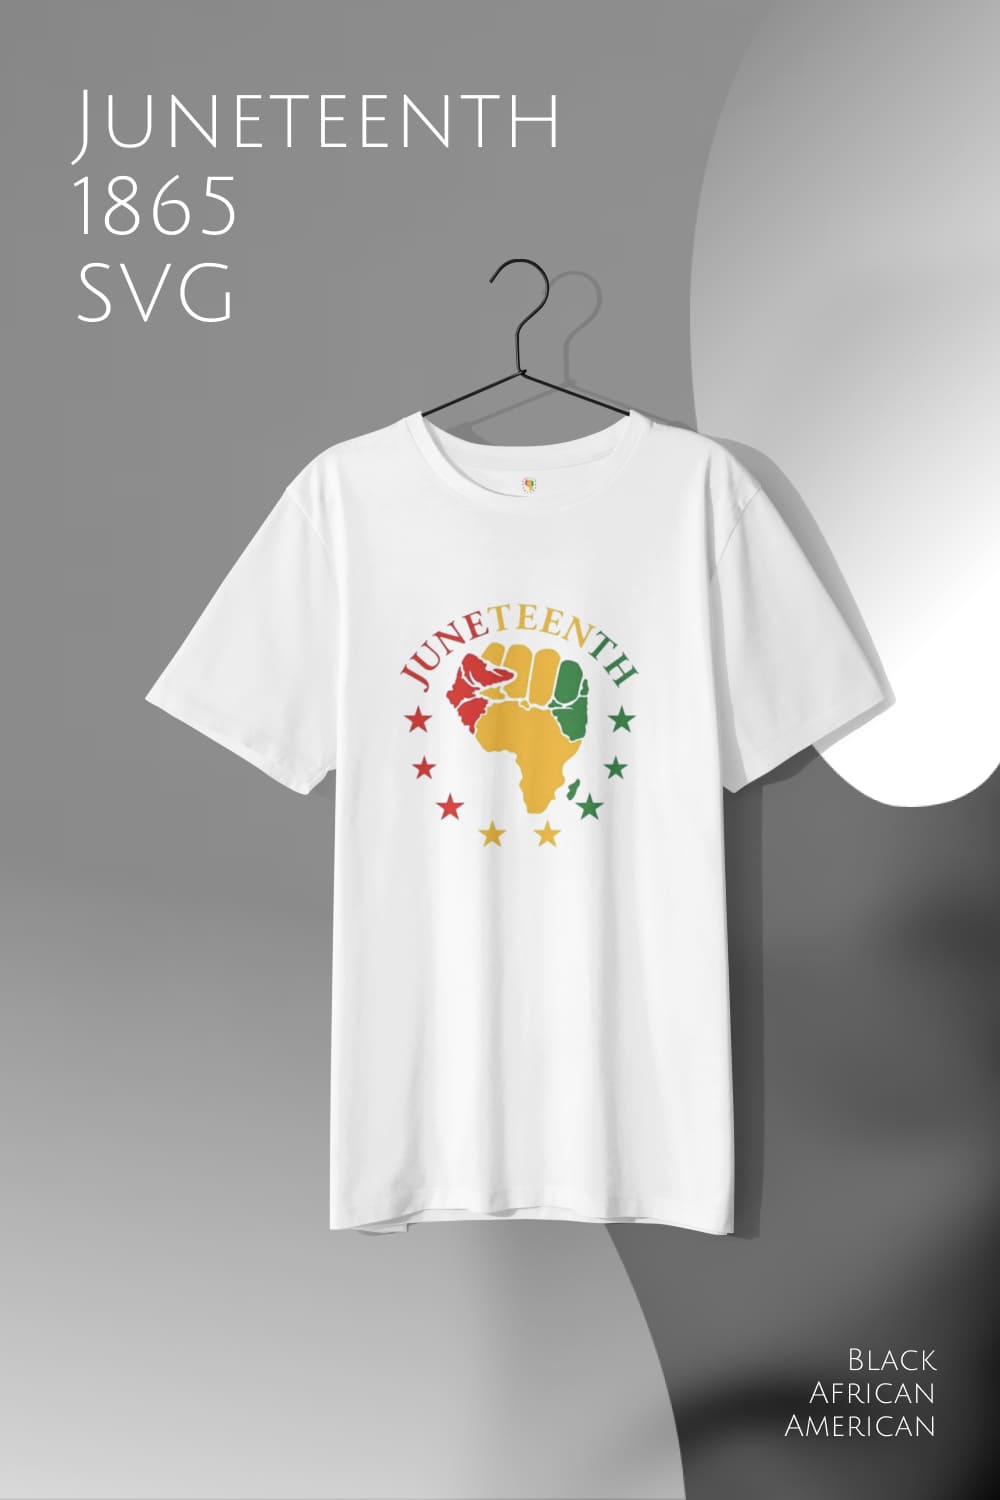 White T-shirt with a colorful print of bright colors of the symbol of freedom.